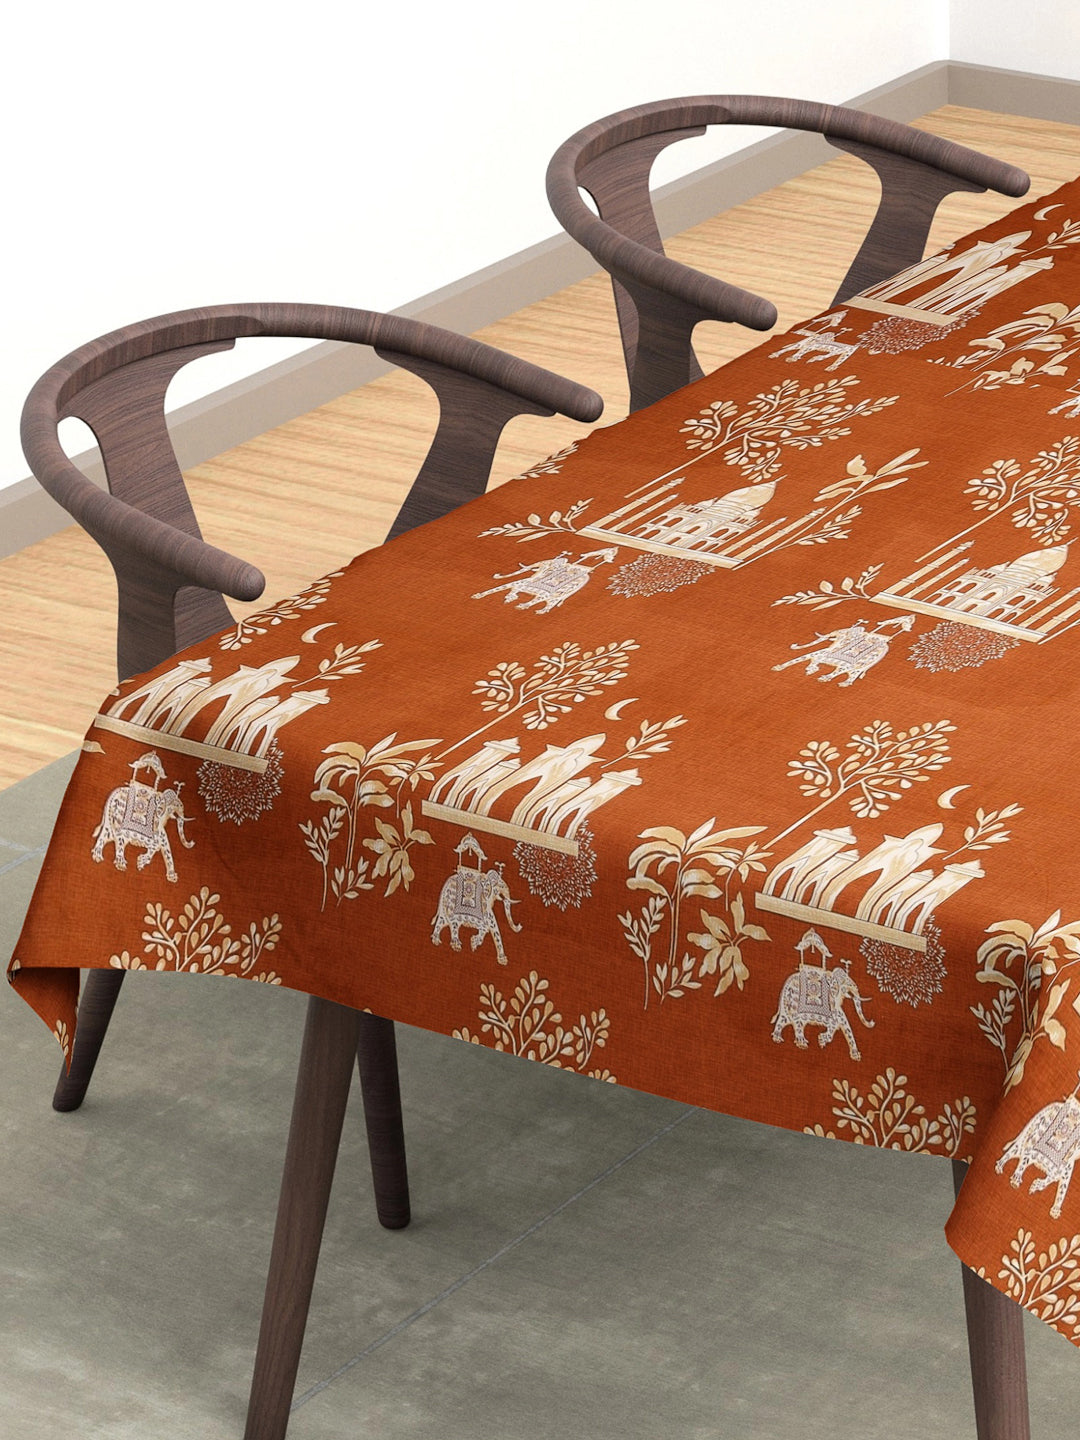 Arrabi Brown Indian Cotton Blend 6 SEATER Table Cover (180 x 130 cm)